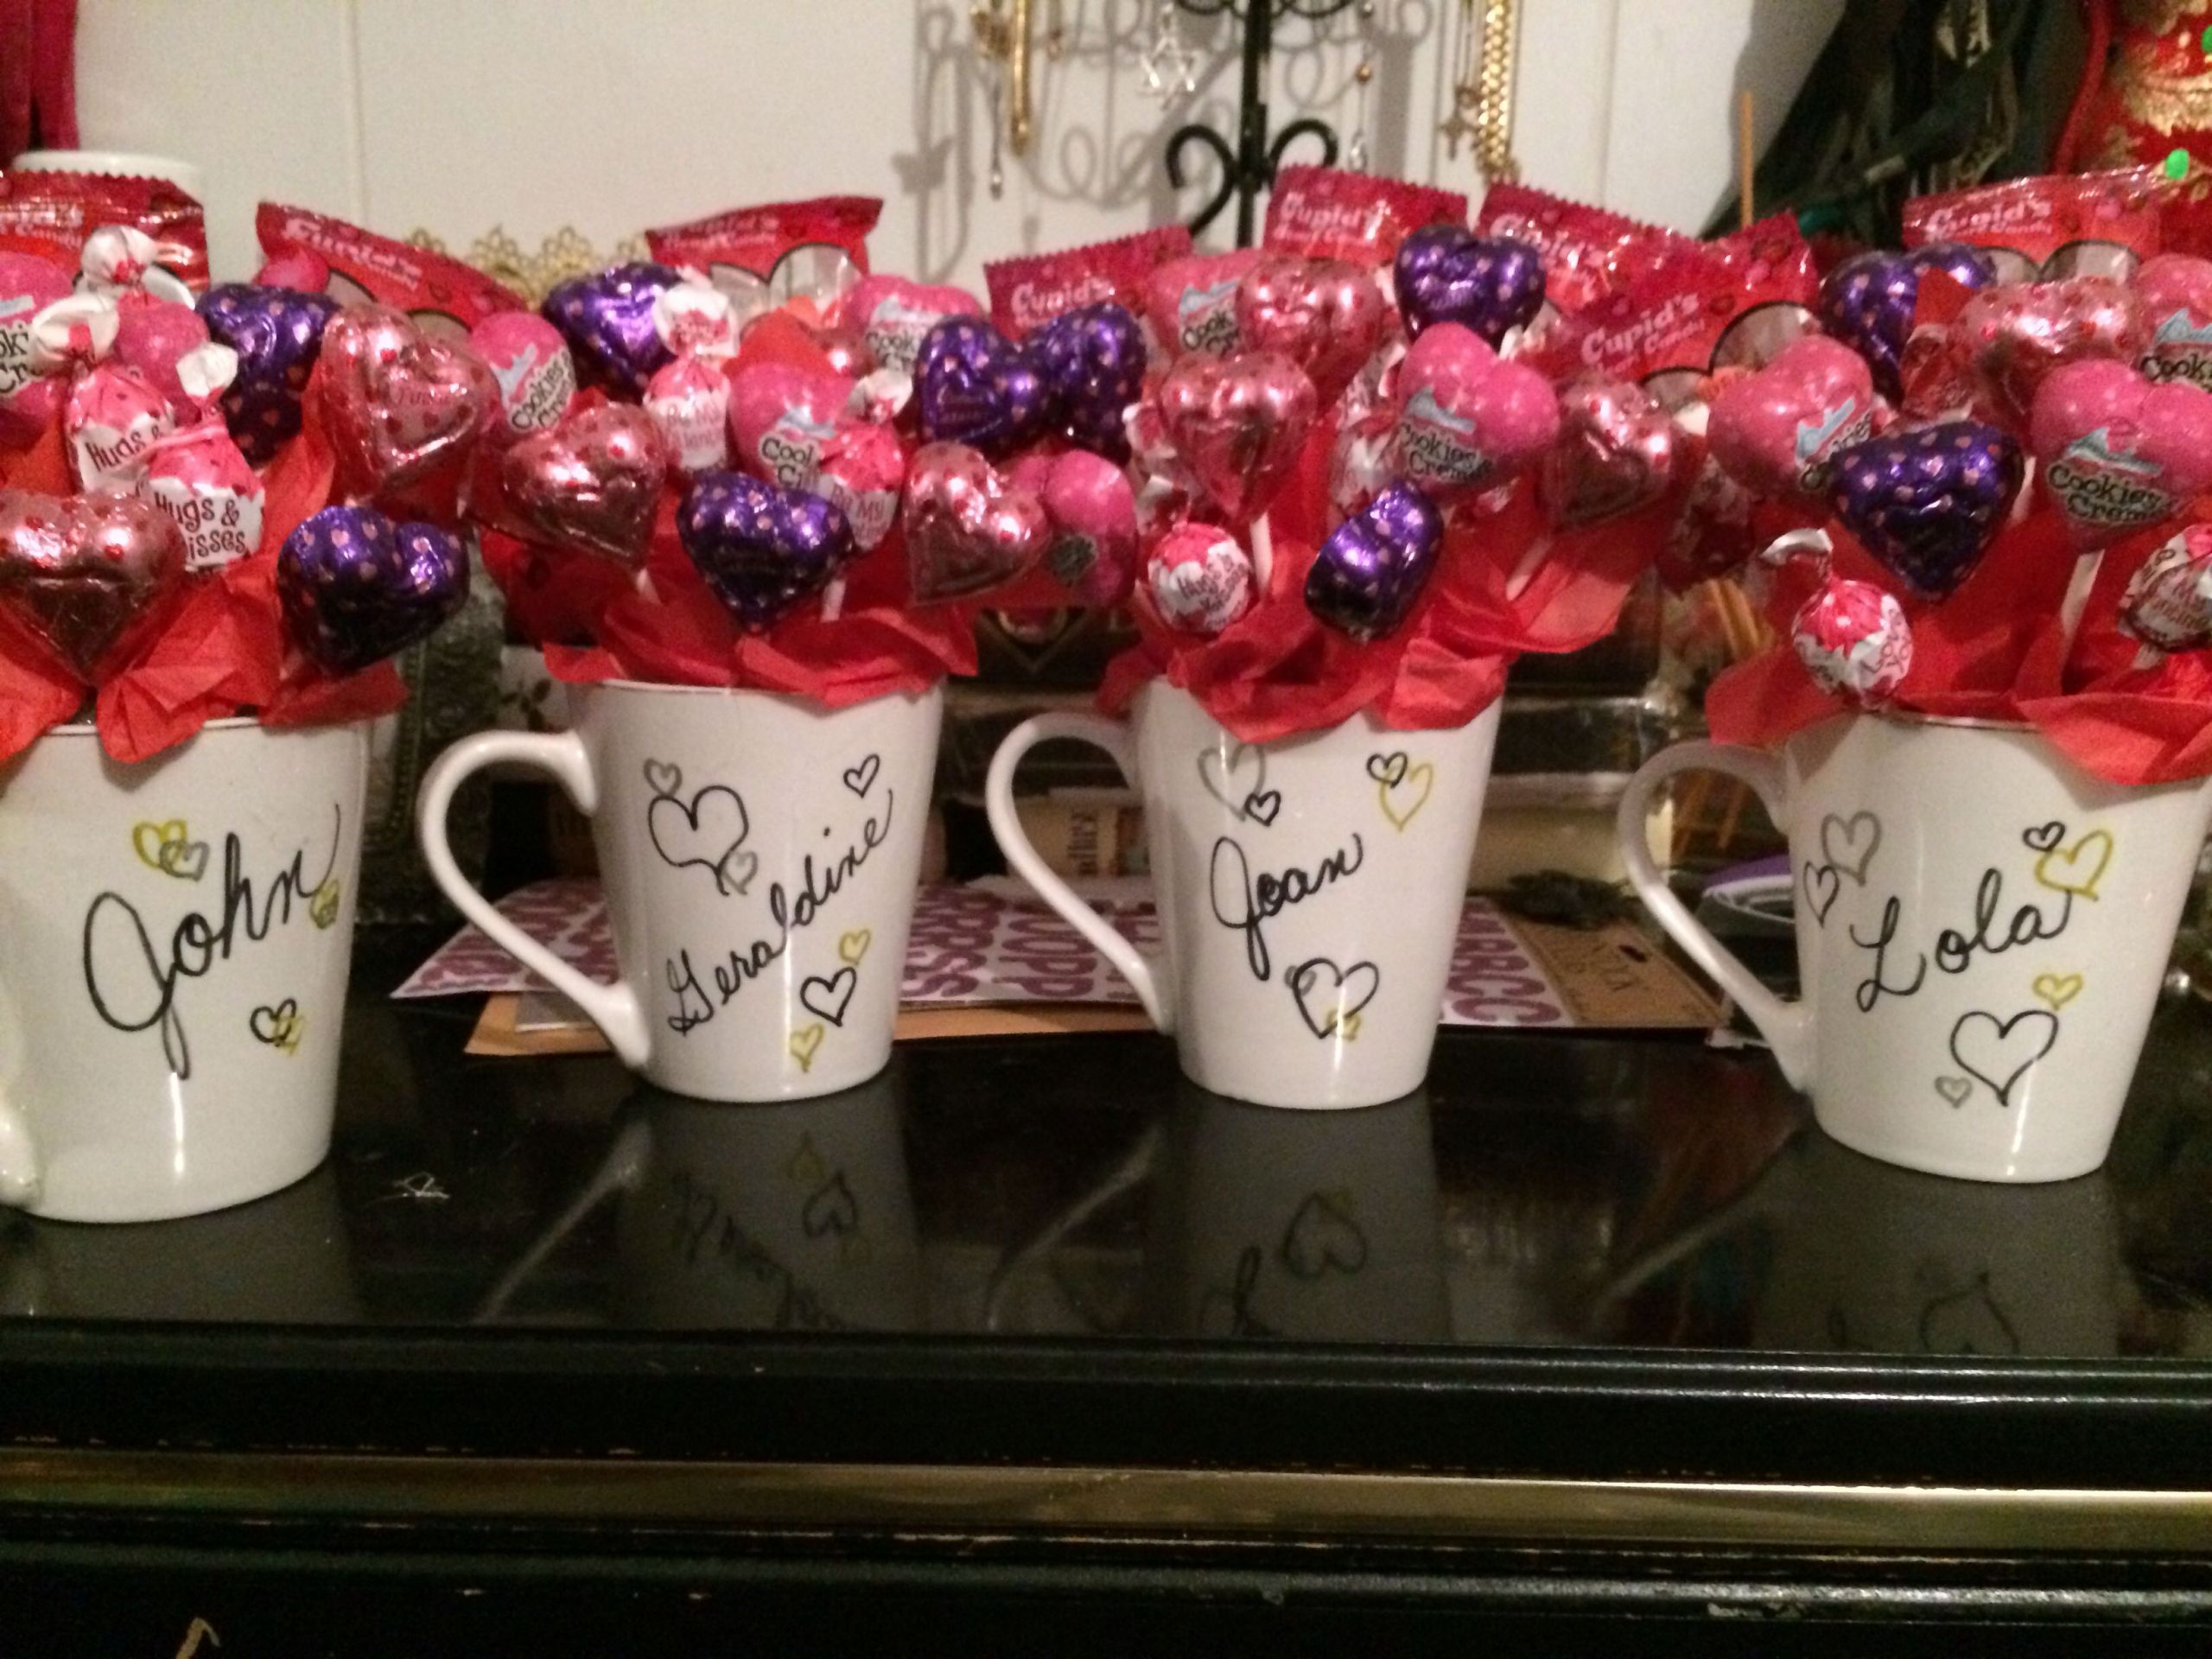 The 35 Best Ideas For Valentine S Day T Ideas For Coworkers Best Recipes Ideas And Collections